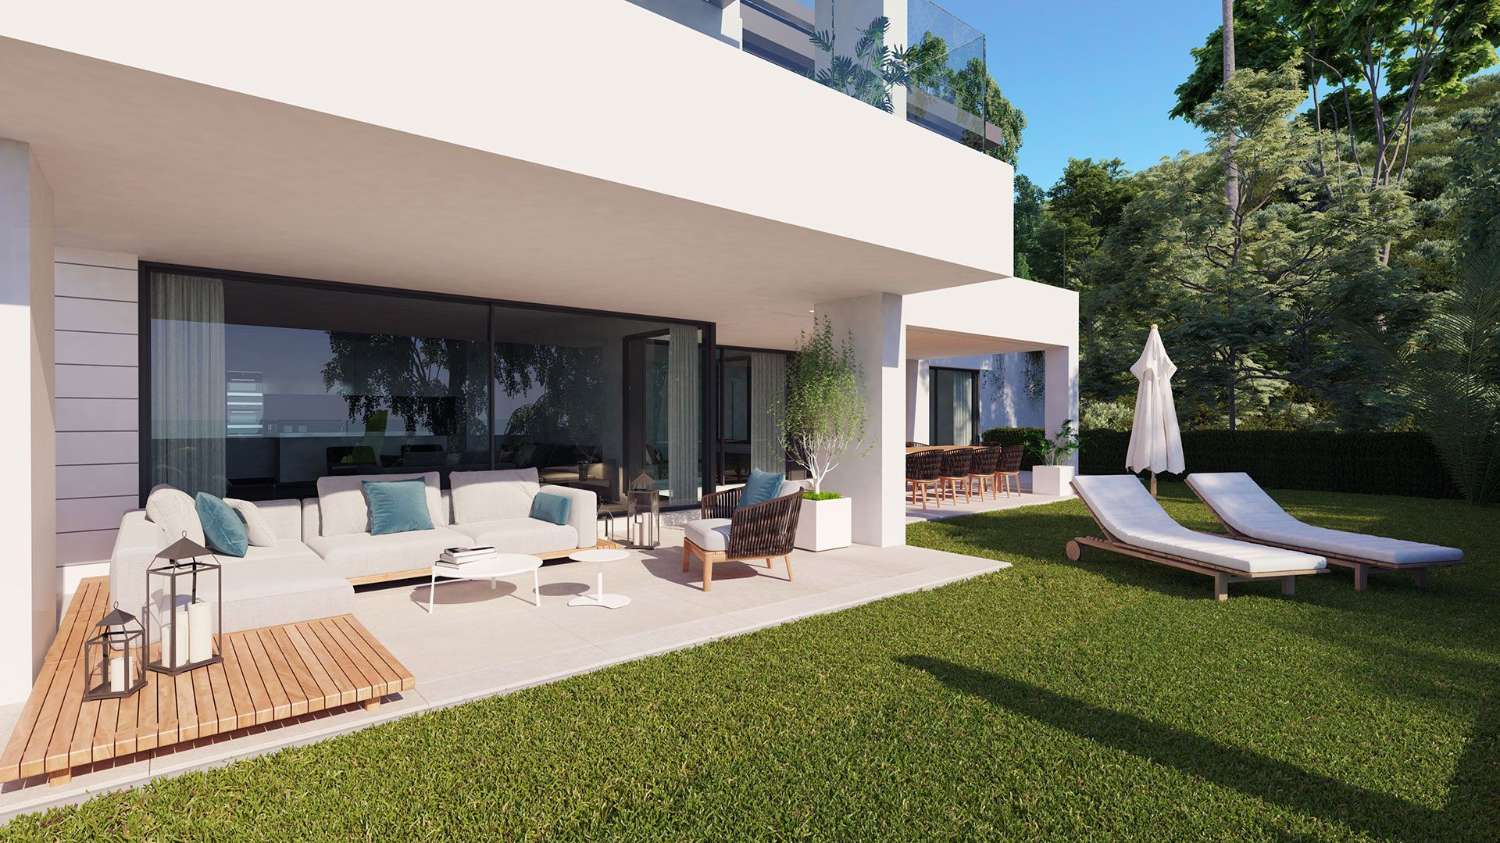 Promotion of 57 homes with garages and storage rooms in Benahavis (Málaga)